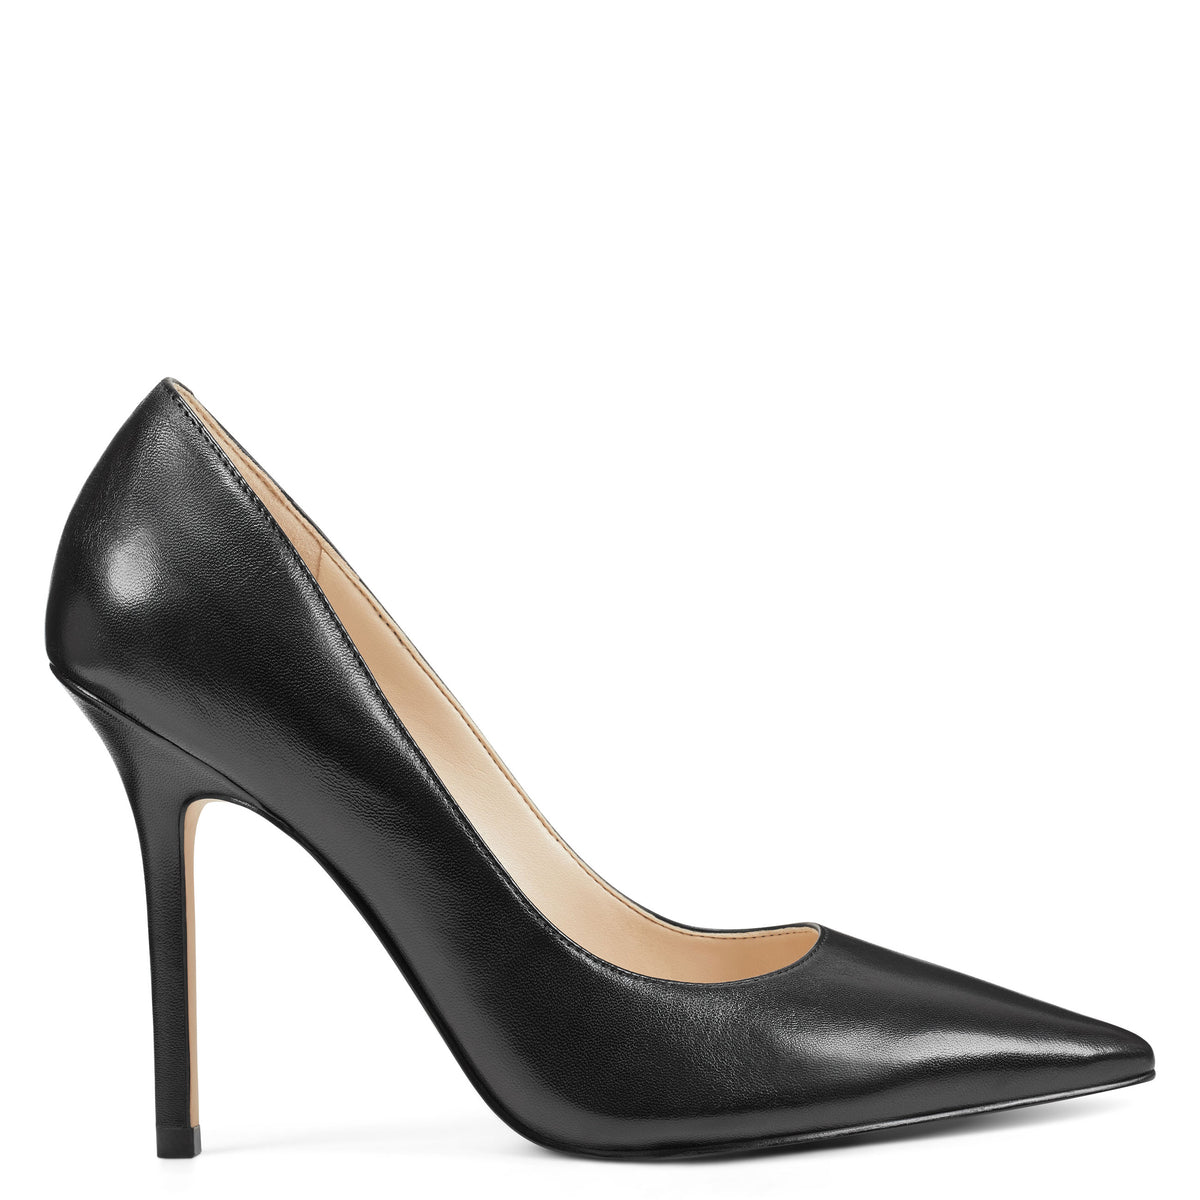 Bliss pointy toe pump